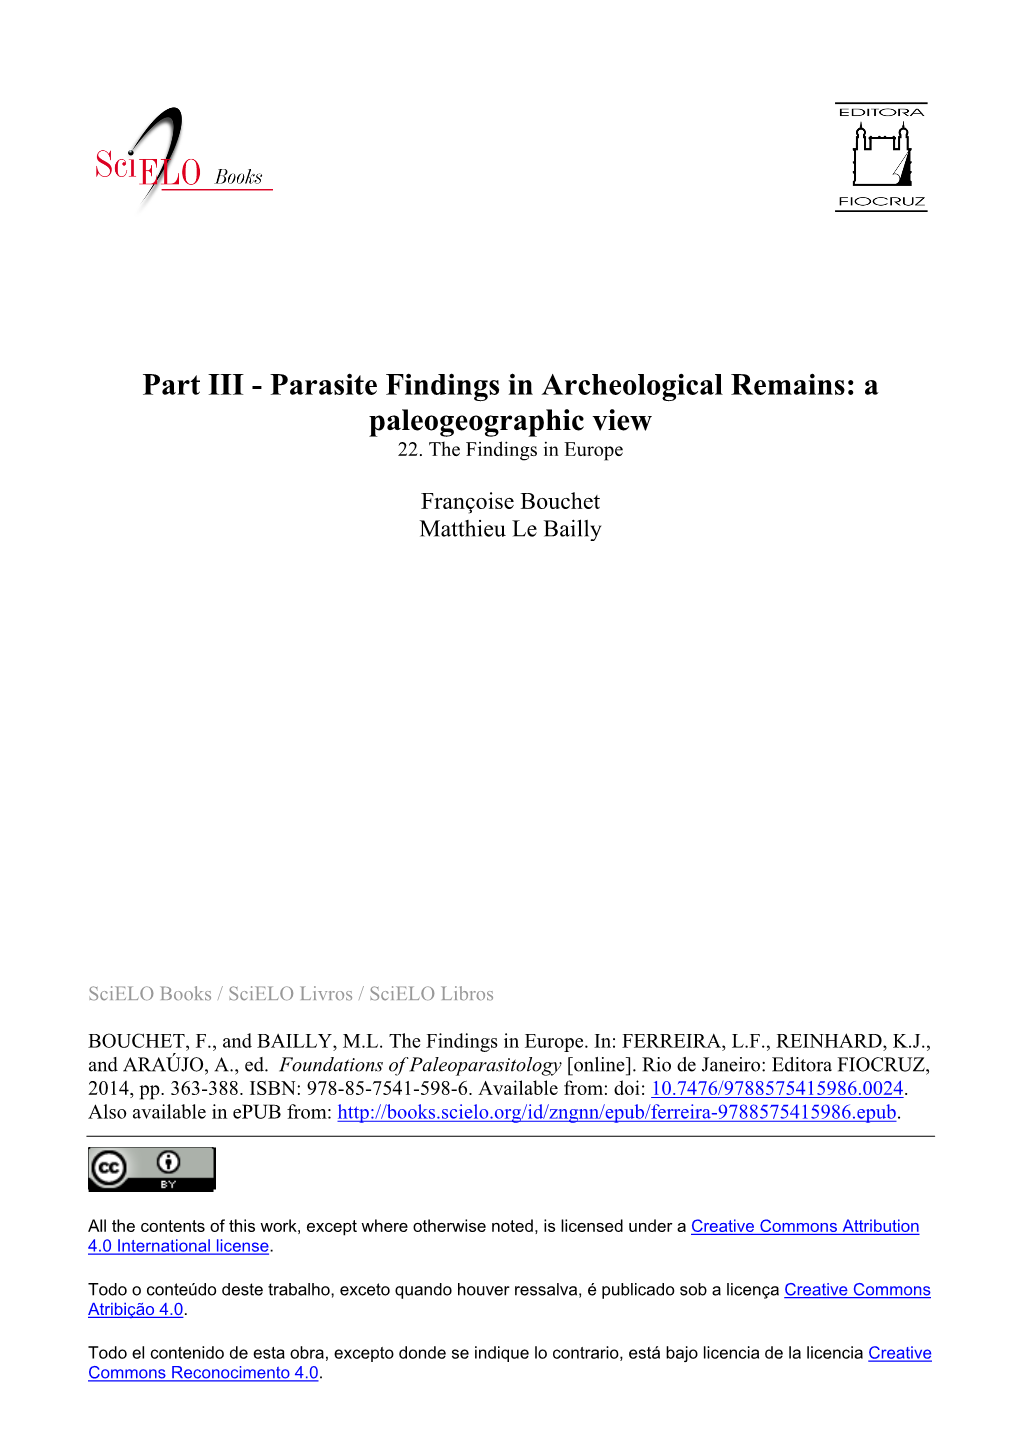 Parasite Findings in Archeological Remains: a Paleogeographic View 22